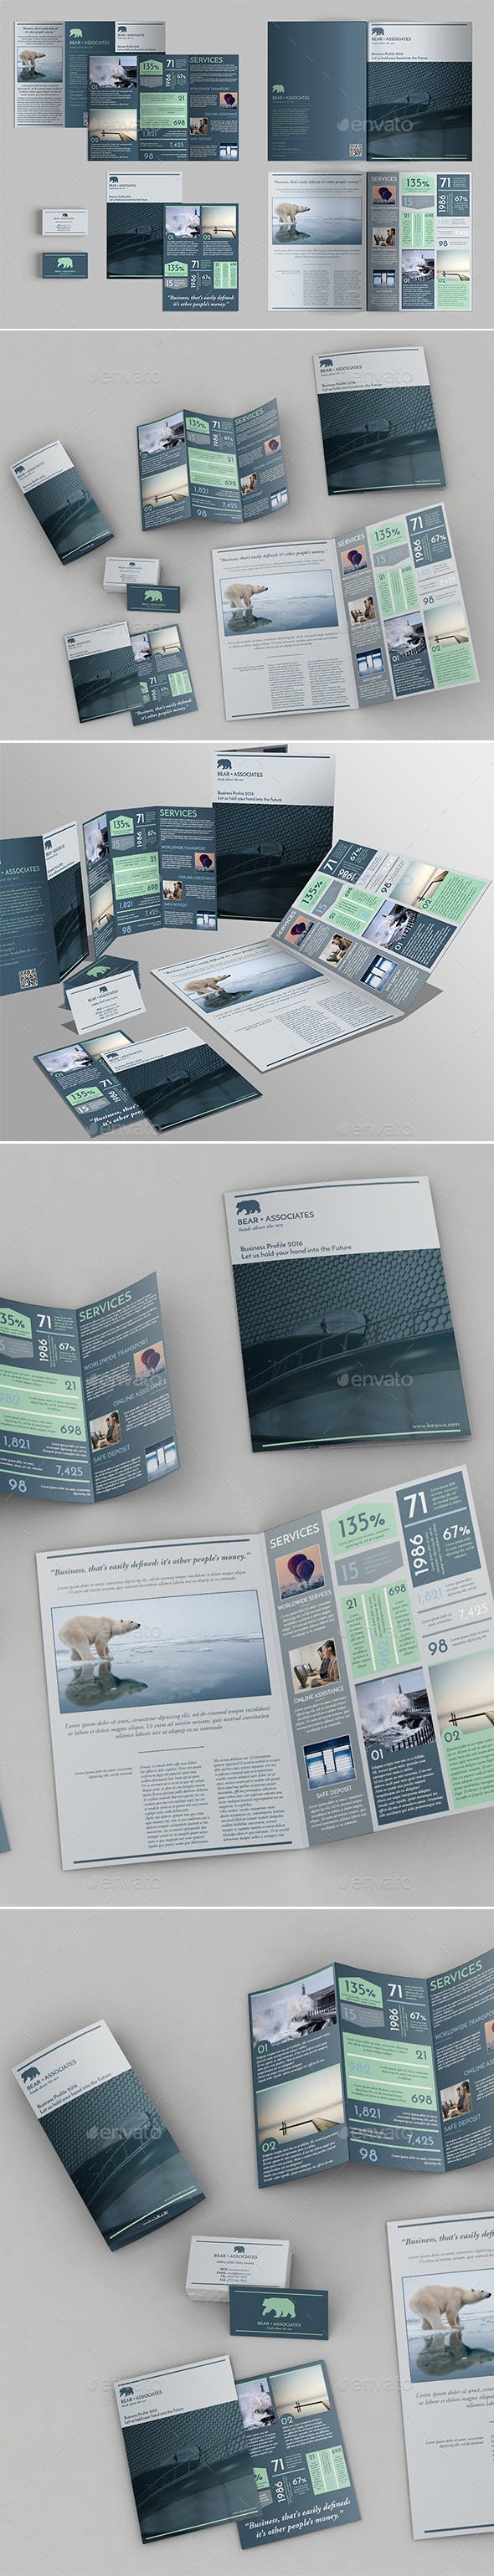 Set Of Brochures / Stationery Templates